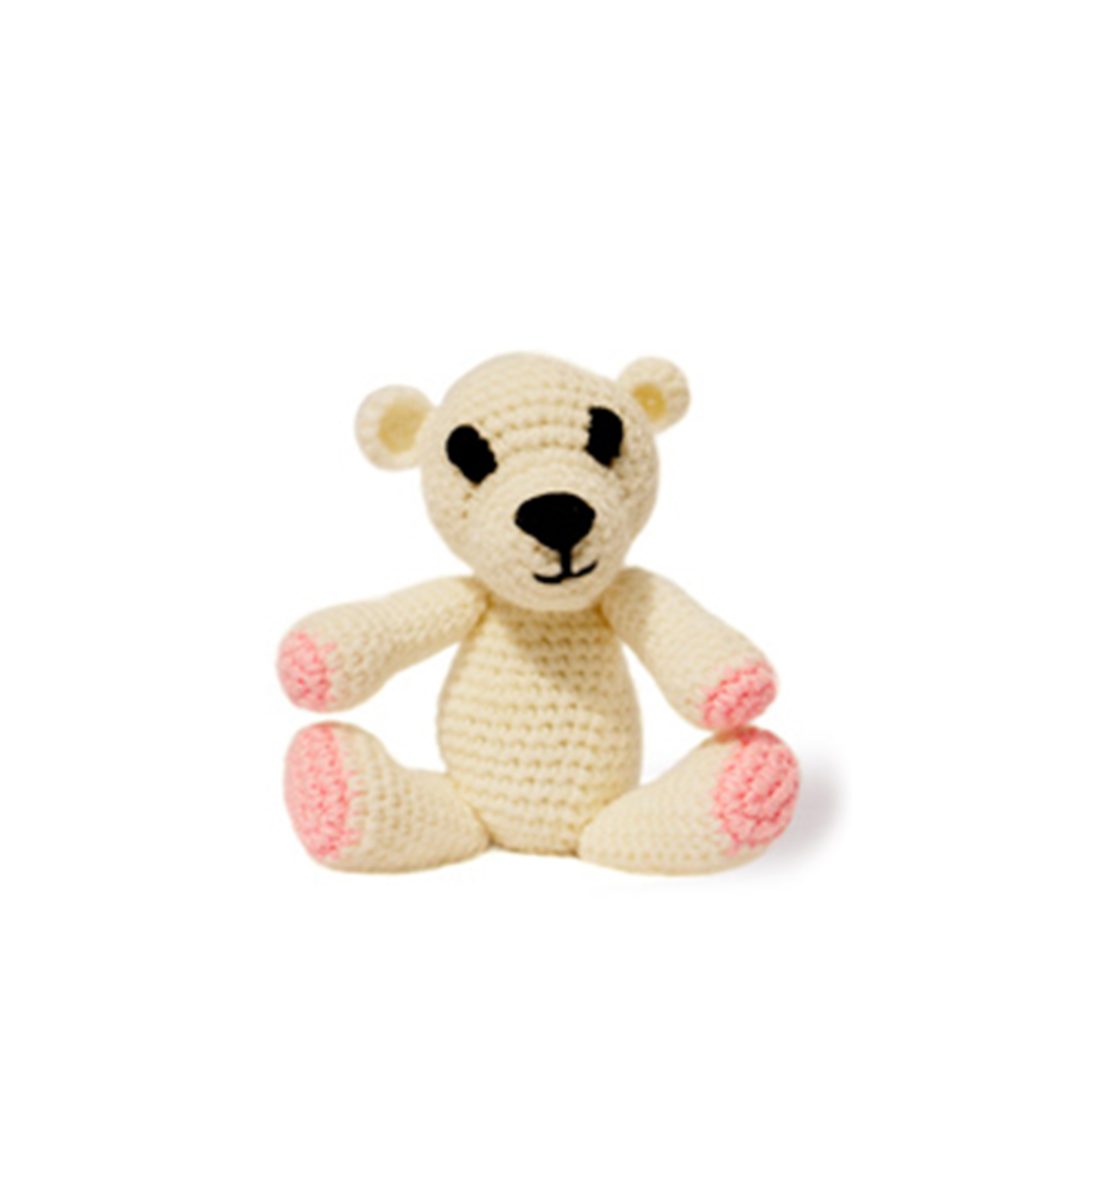 Cute Baby Teddy bear with the Rattle inside 1045